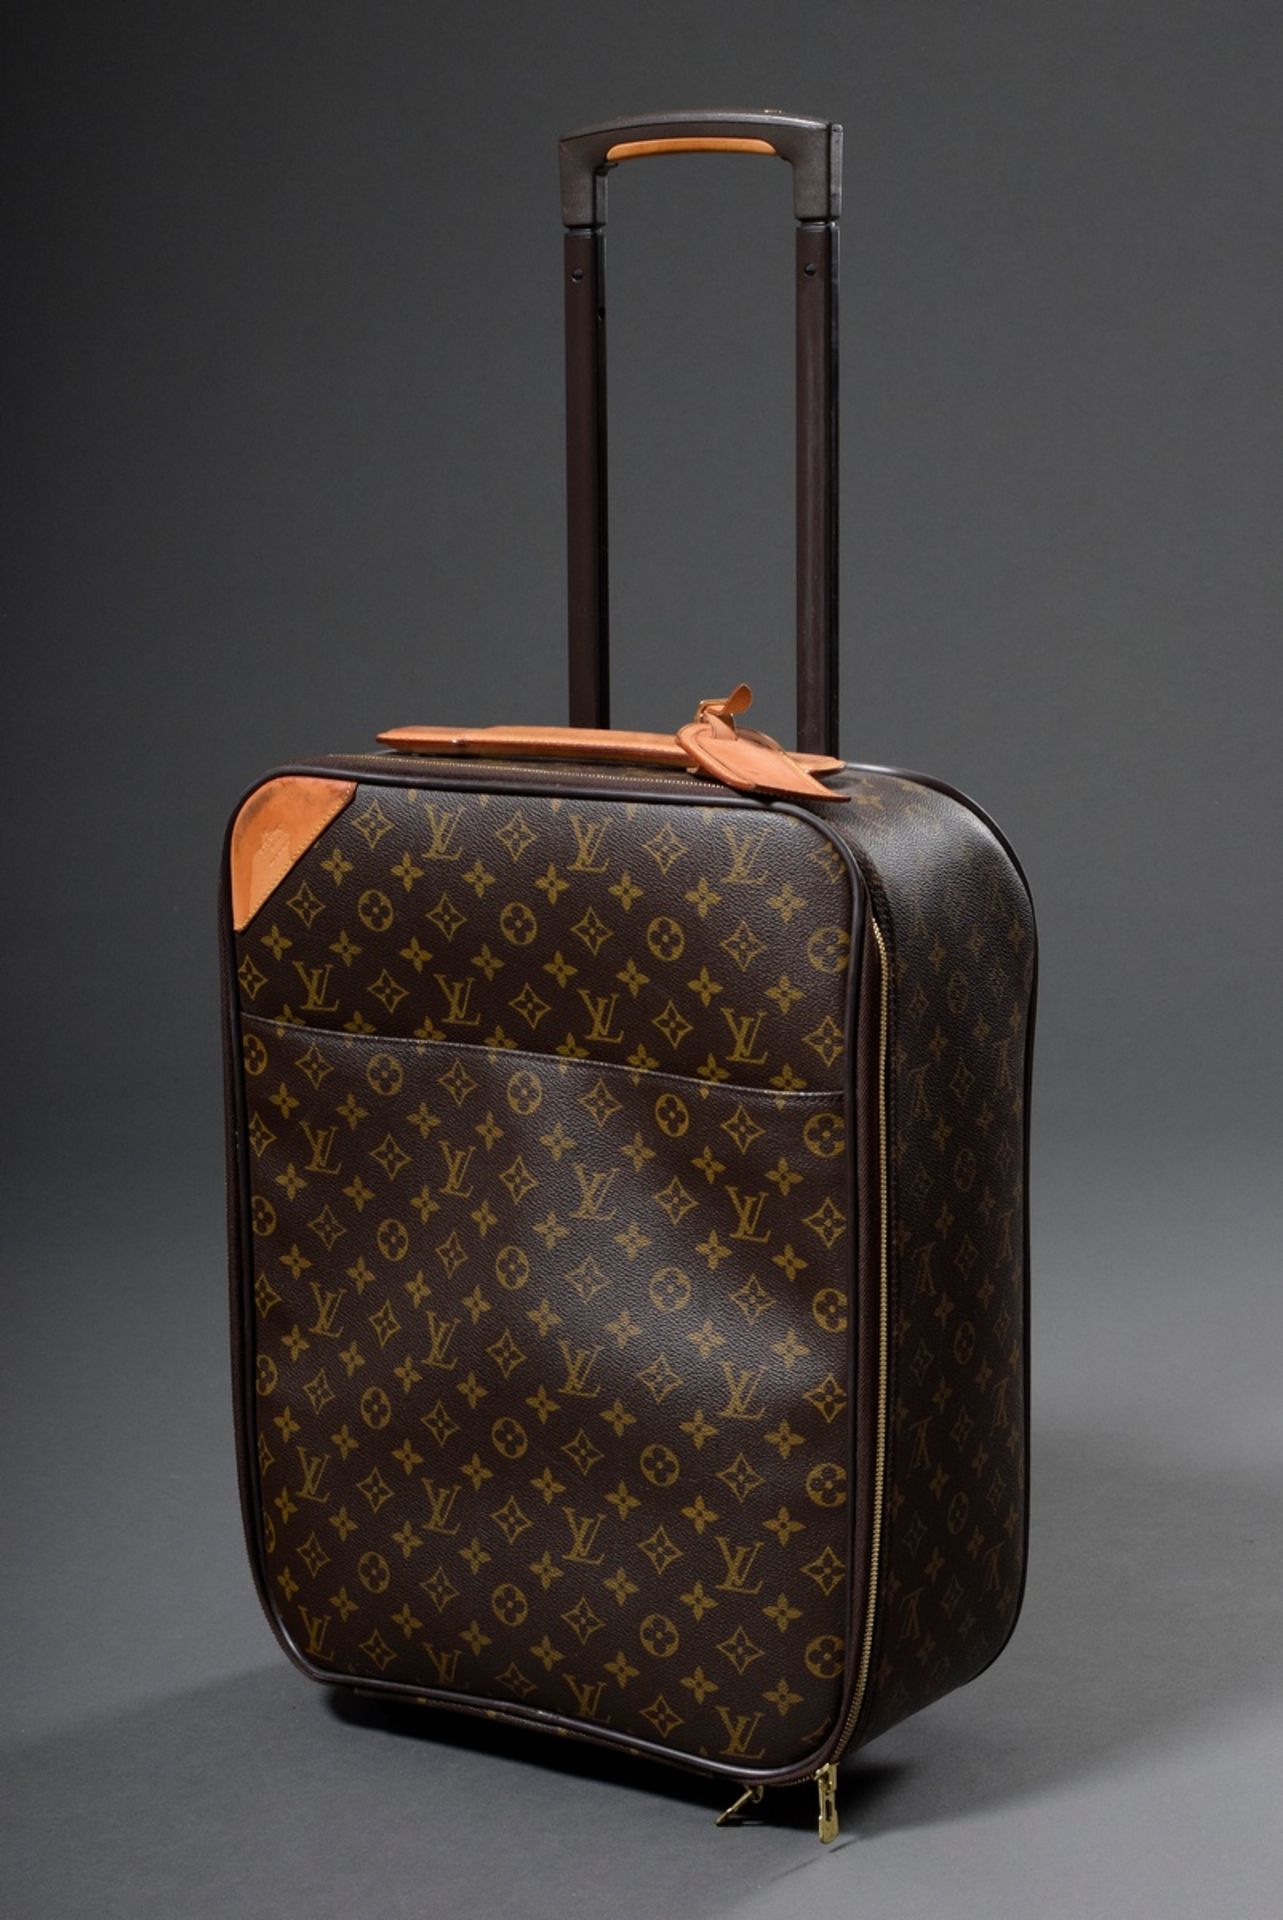 Louis Vuitton "Pégase 50" in "Monogram Canvas" with light cowhide details, gold-coloured hardware, 